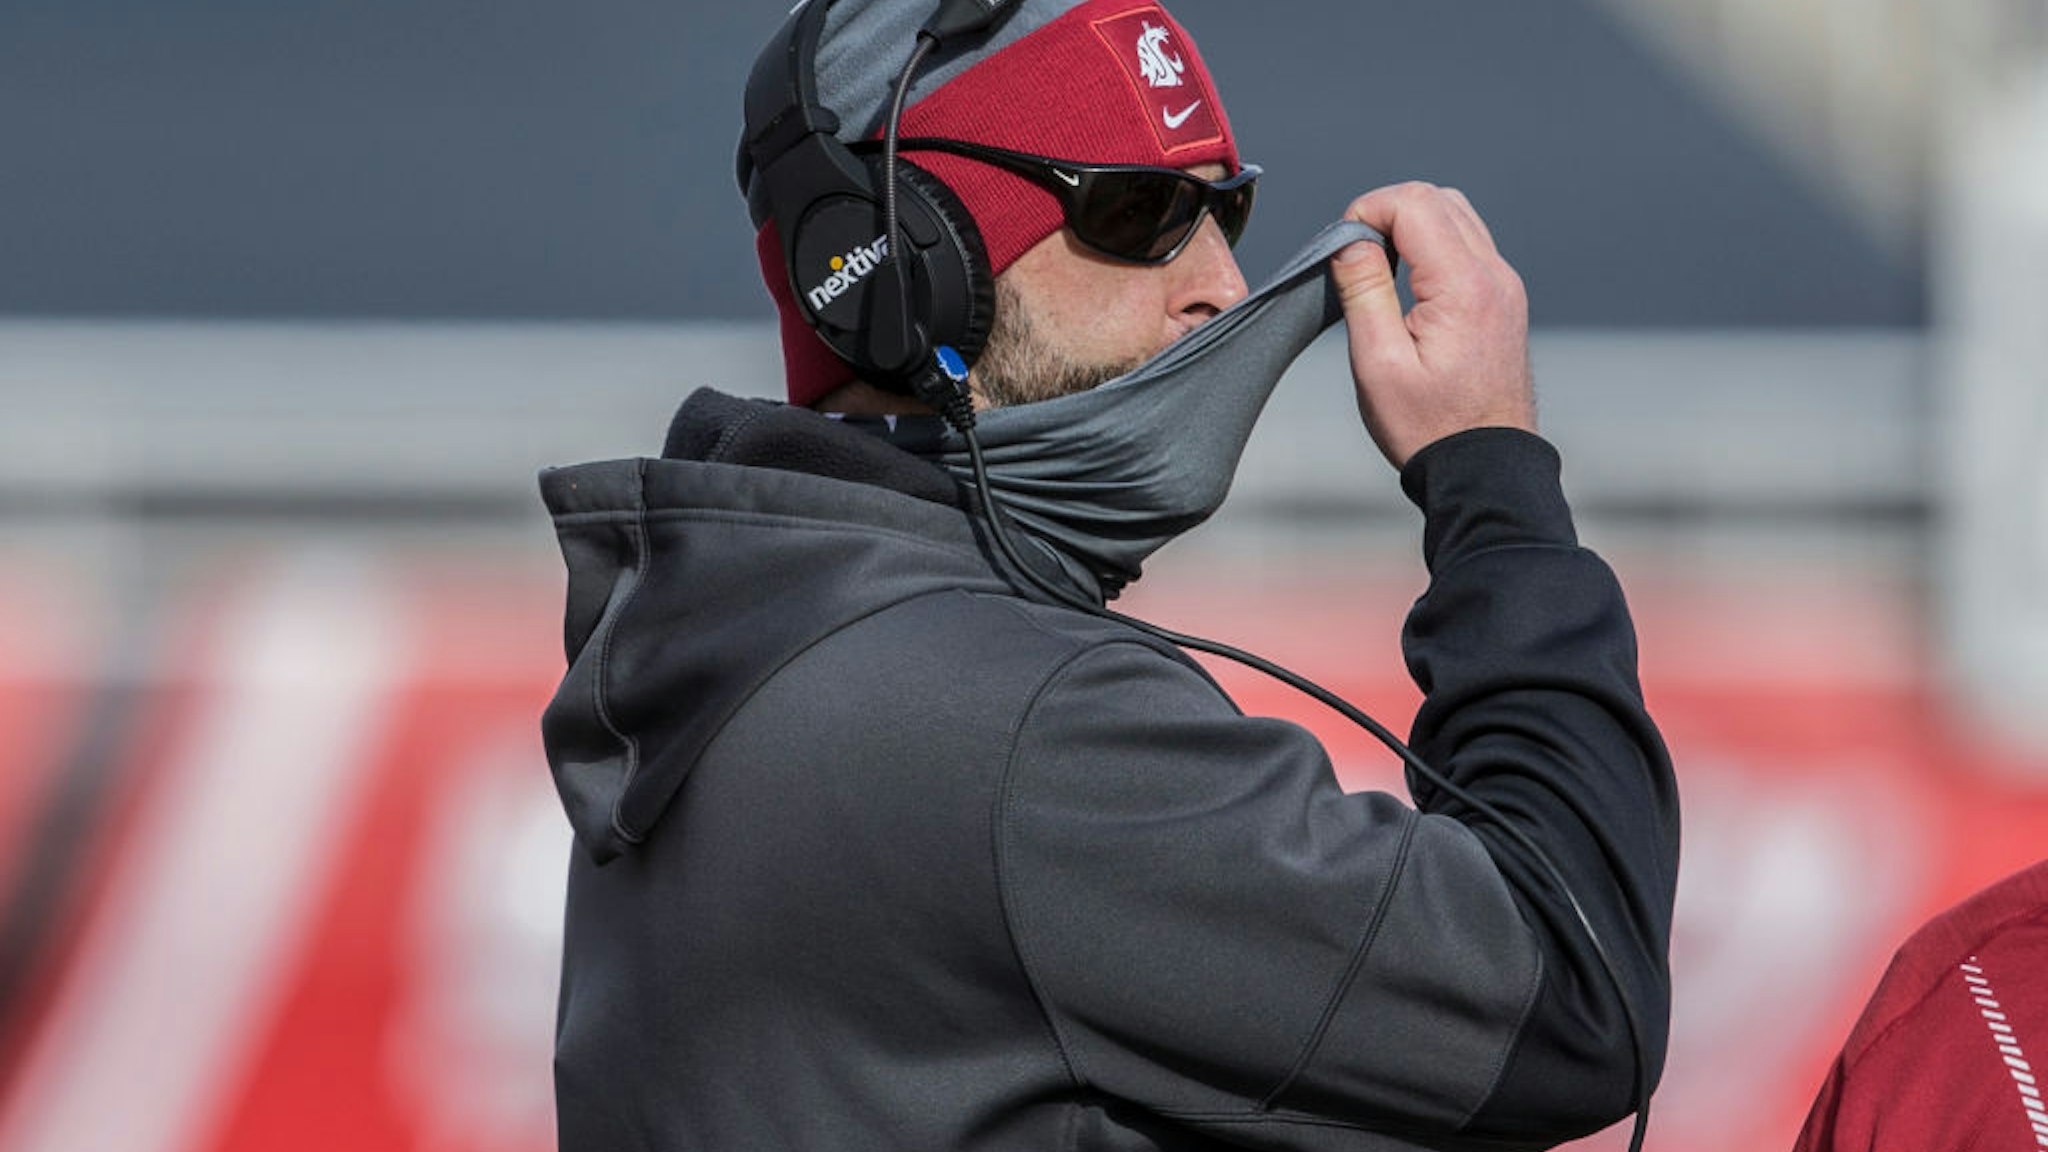 SALT LAKE CITY, UT - DECEMBER 19: Nick Rolovich head coach of the Washington State Cougars adjusts his mask during their game against the Utah Utes on December 19, 2020 at Rice Eccles Stadium in Salt Lake City, Utah. (Photo by Chris Gardner/Getty Images)